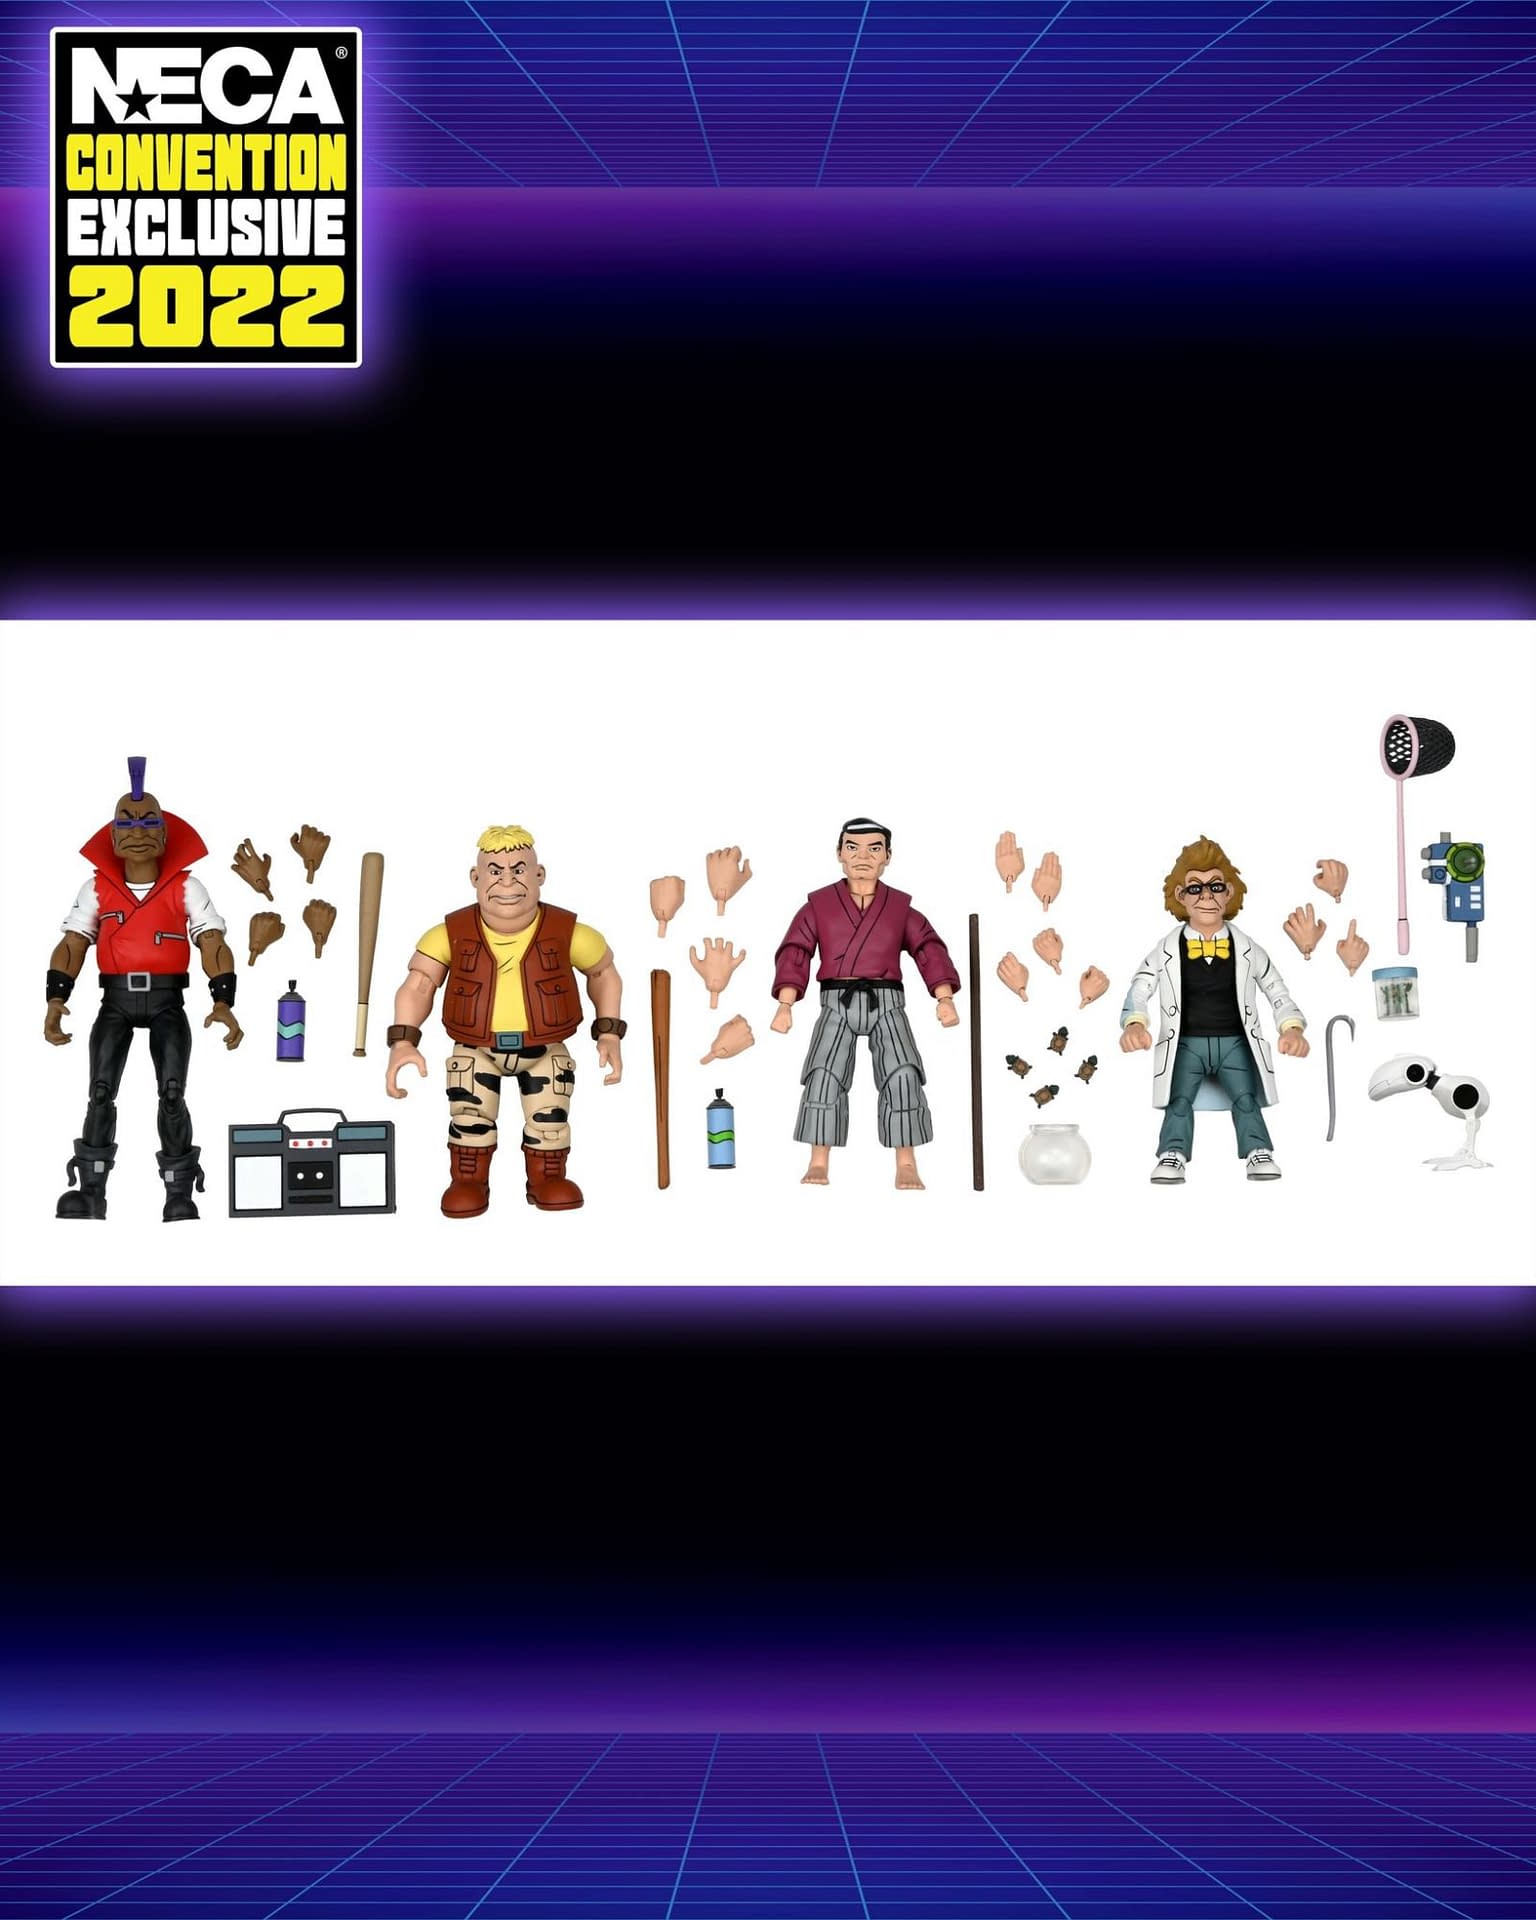 NECA: All Of The SDCC 2022 Exclusives In One Place